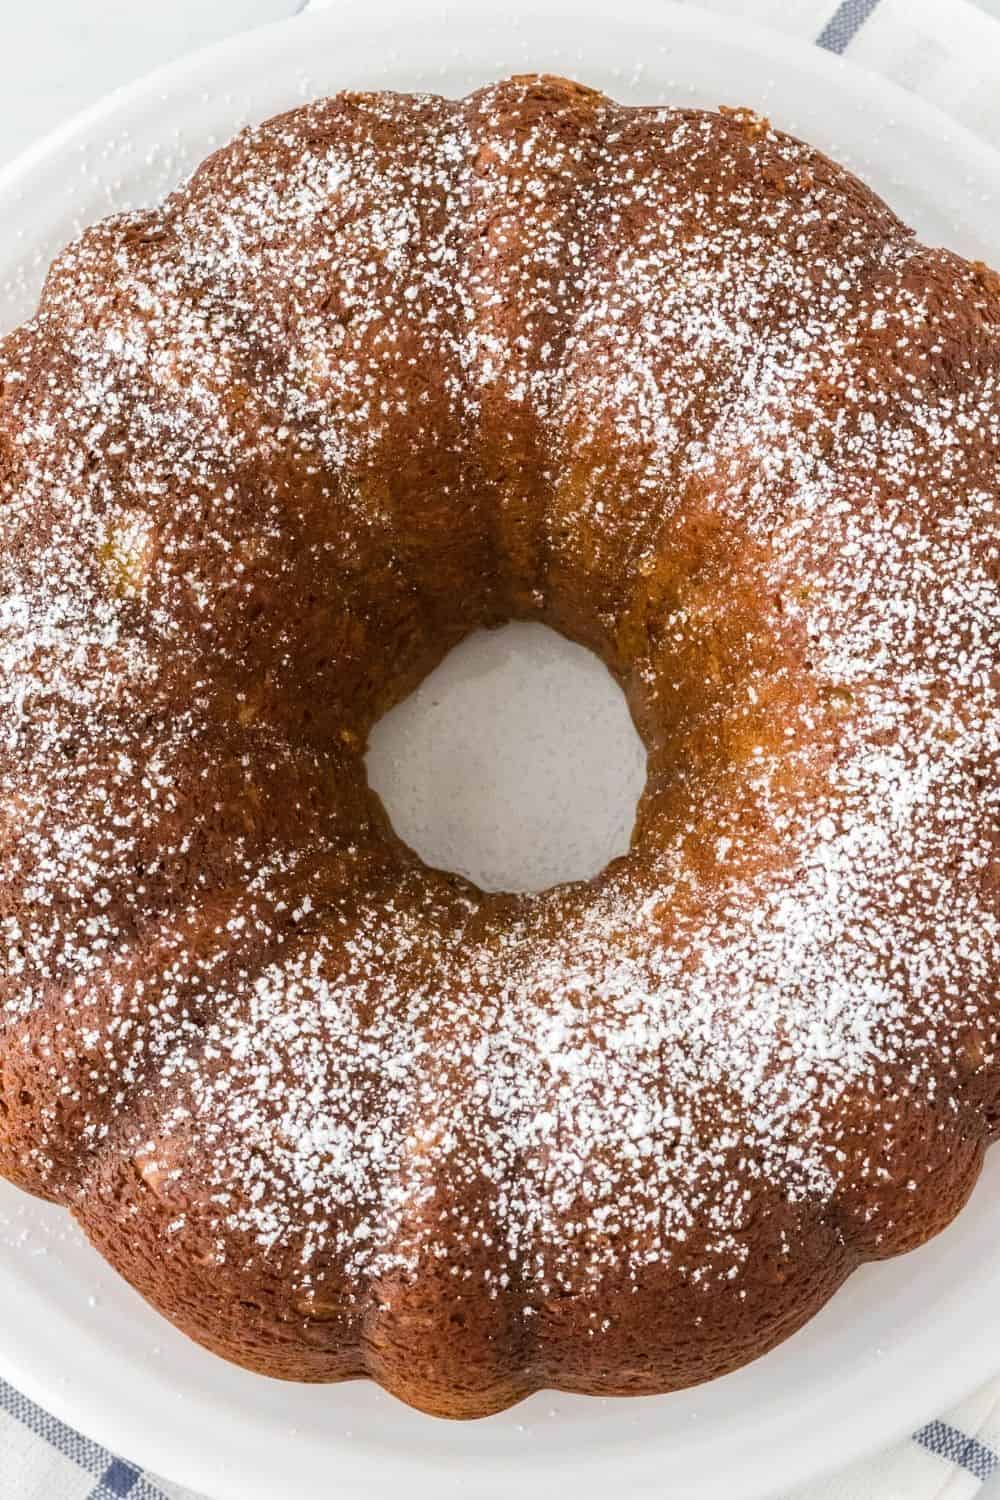 overhead view of pistachio bundt cake dusted with powdered sugar and served on a white plate